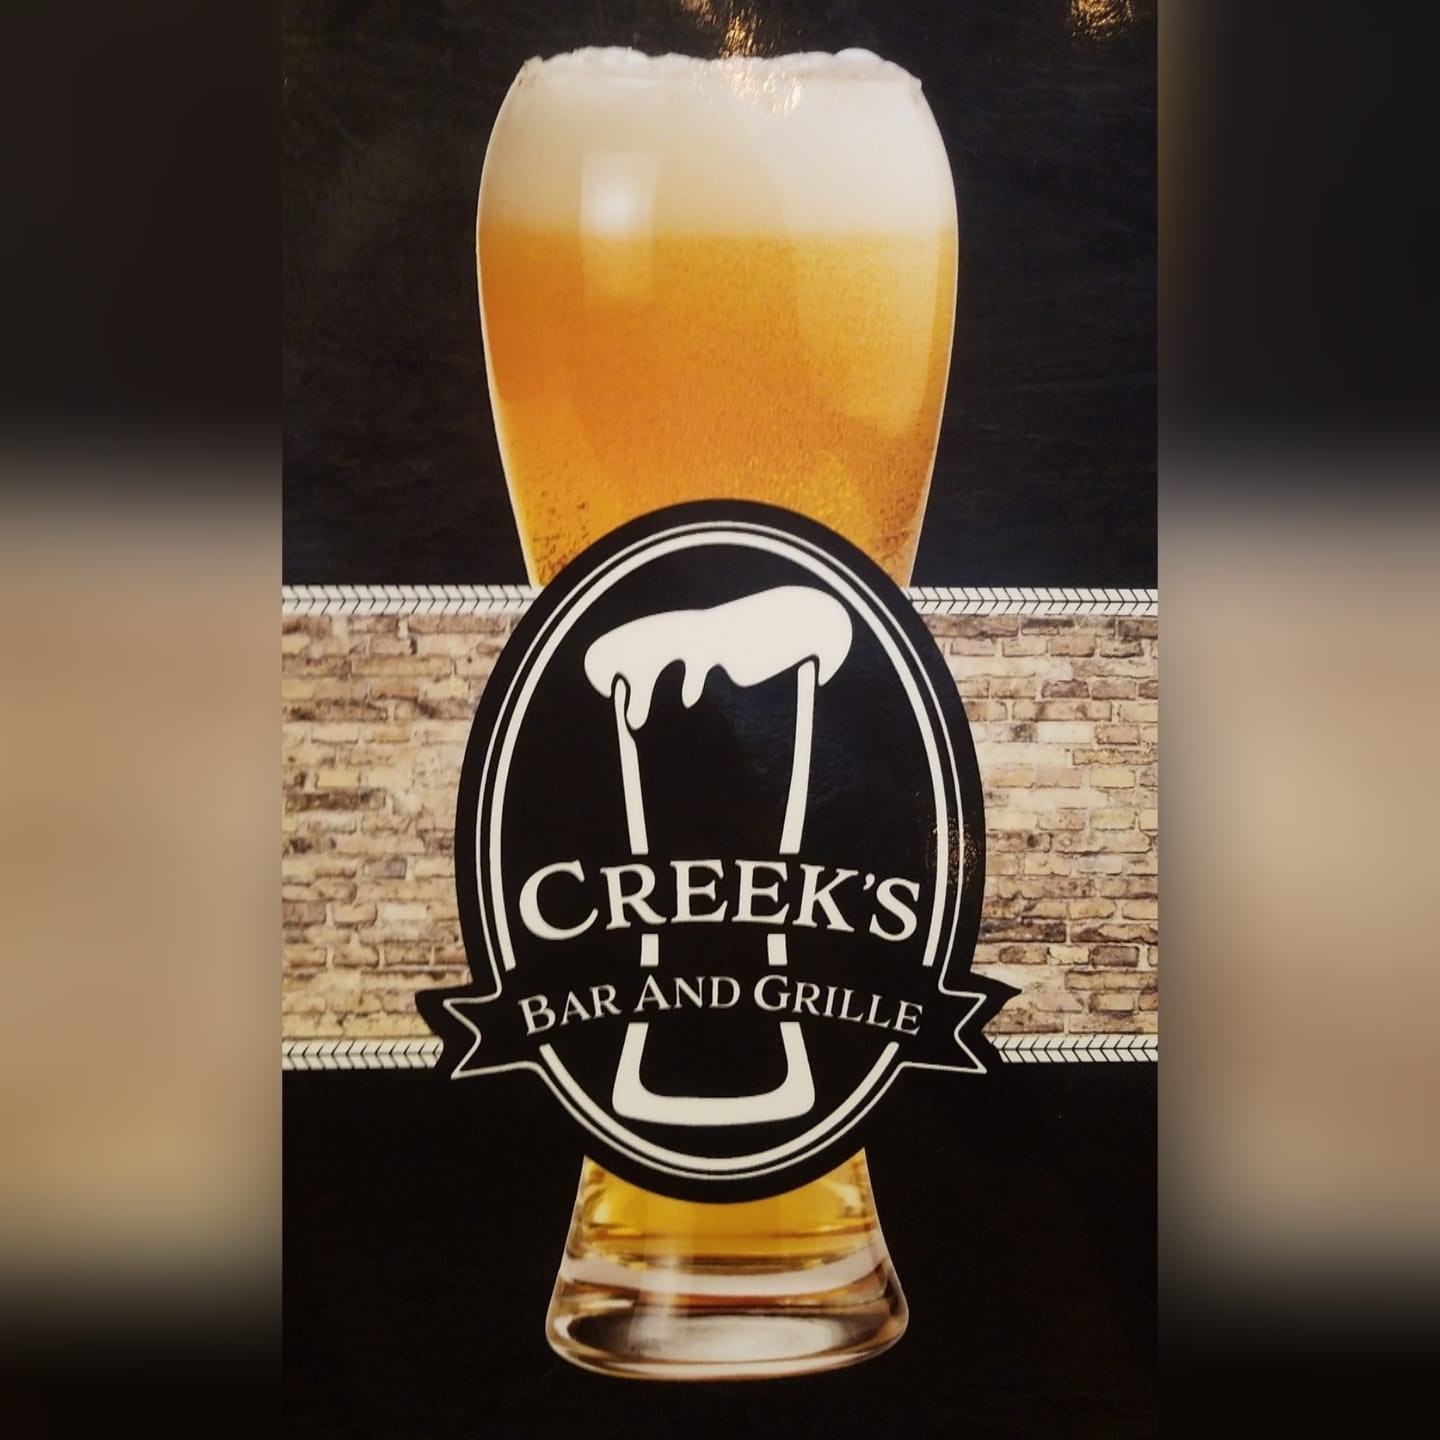 Owners of Creek's Bar & Grille Announce Plans to Close Restaurant at End of the Month